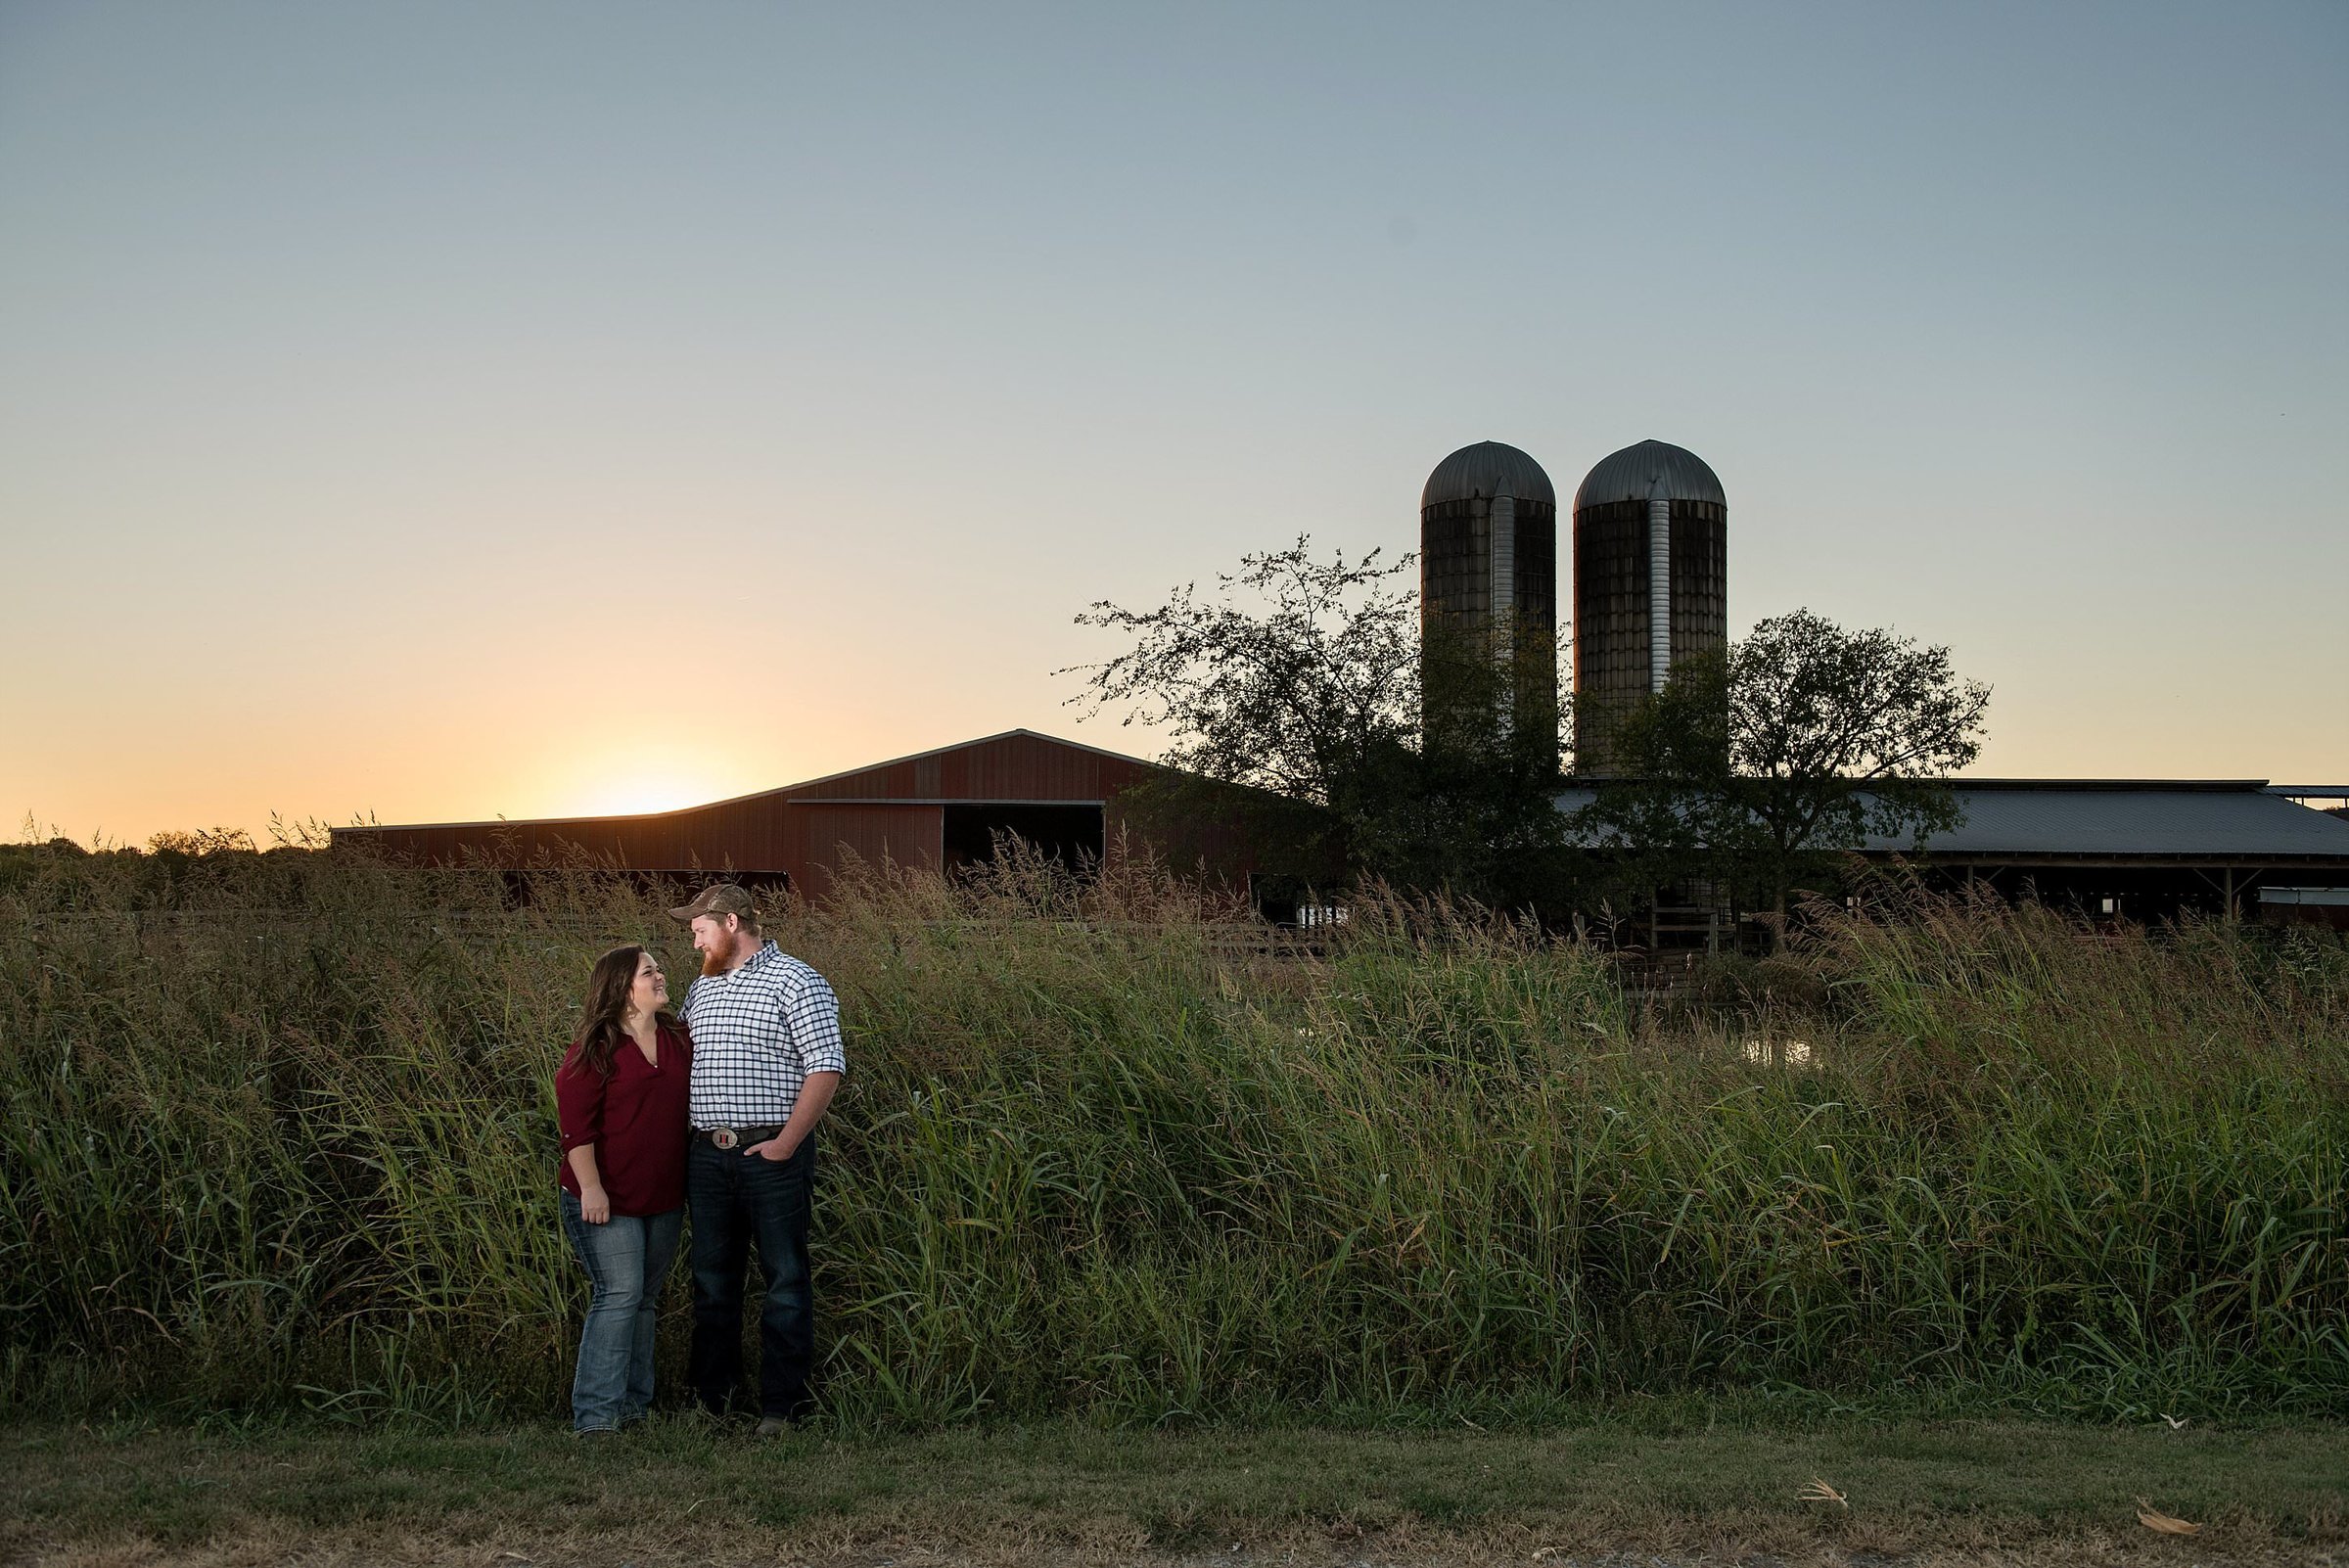 Couple standing together on family land with the family farm in the background showing 2 grain silos